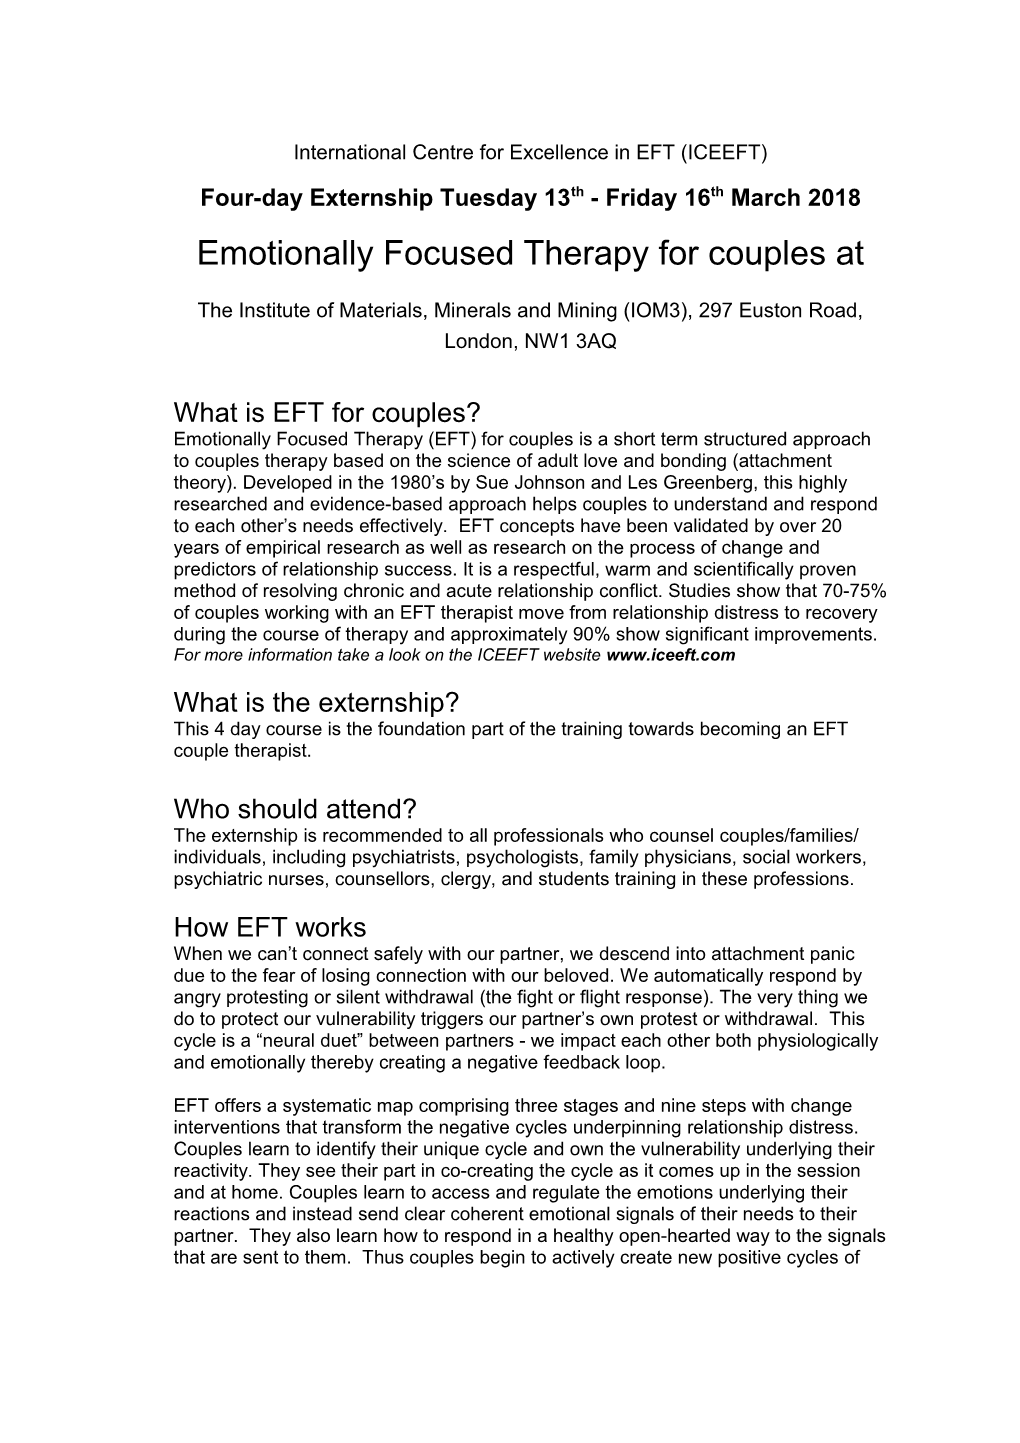 Emotionally Focused Therapy for Couples At